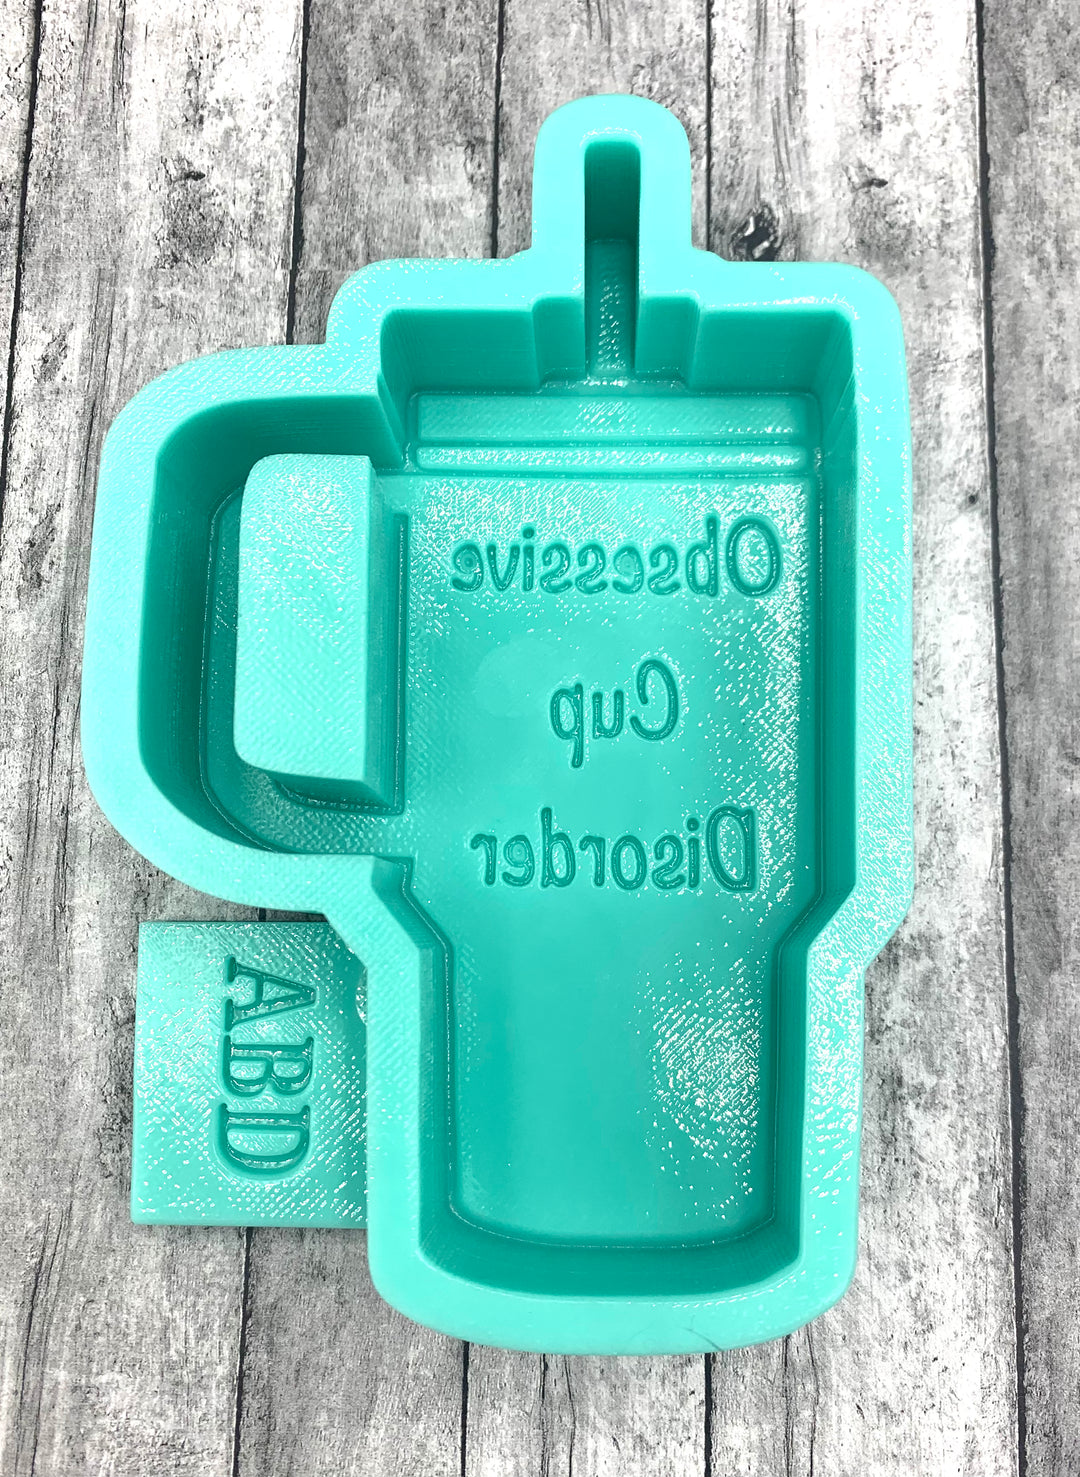 Obsessive Cup Disorder Cup Freshie Silicone Mold